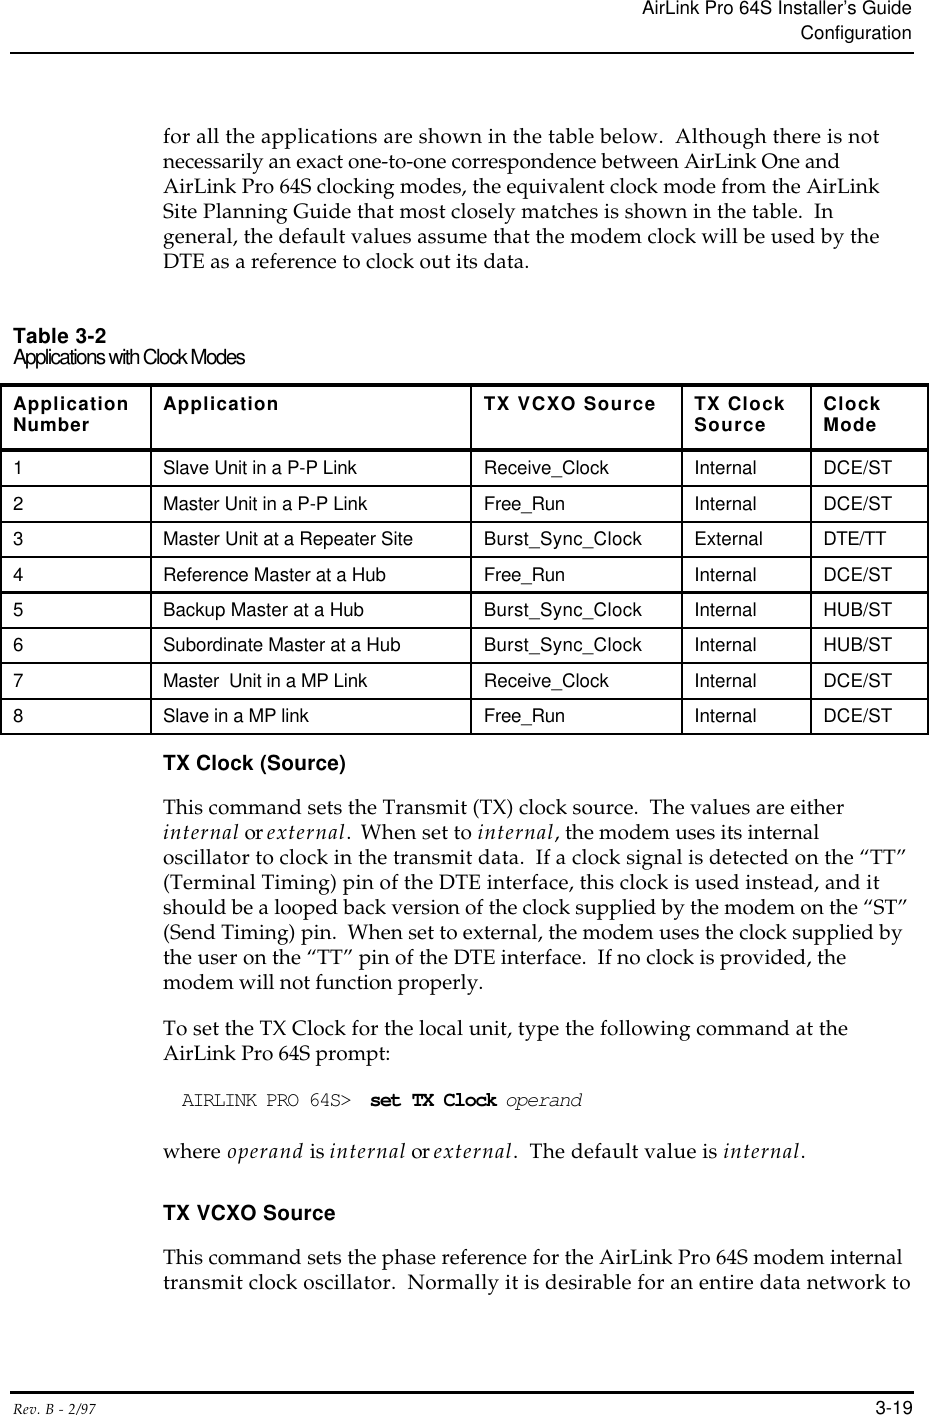 AirLink Pro 64S Installer’s GuideConfigurationRev. B - 2/97 3-19for all the applications are shown in the table below.  Although there is notnecessarily an exact one-to-one correspondence between AirLink One andAirLink Pro 64S clocking modes, the equivalent clock mode from the AirLinkSite Planning Guide that most closely matches is shown in the table.  Ingeneral, the default values assume that the modem clock will be used by theDTE as a reference to clock out its data.Table 3-2Applications with Clock ModesApplicationNumber Application TX VCXO Source TX ClockSource ClockMode1Slave Unit in a P-P Link Receive_Clock Internal DCE/ST2Master Unit in a P-P Link Free_Run Internal DCE/ST3Master Unit at a Repeater Site Burst_Sync_Clock External DTE/TT4Reference Master at a Hub Free_Run Internal DCE/ST5 Backup Master at a Hub Burst_Sync_Clock Internal HUB/ST6Subordinate Master at a Hub Burst_Sync_Clock Internal HUB/ST7Master  Unit in a MP Link Receive_Clock Internal DCE/ST8Slave in a MP link Free_Run Internal DCE/STTX Clock (Source)This command sets the Transmit (TX) clock source.  The values are eitherinternal or external.  When set to internal, the modem uses its internaloscillator to clock in the transmit data.  If a clock signal is detected on the “TT”(Terminal Timing) pin of the DTE interface, this clock is used instead, and itshould be a looped back version of the clock supplied by the modem on the “ST”(Send Timing) pin.  When set to external, the modem uses the clock supplied bythe user on the “TT” pin of the DTE interface.  If no clock is provided, themodem will not function properly.To set the TX Clock for the local unit, type the following command at theAirLink Pro 64S prompt:AIRLINK PRO 64S&gt;  set TX Clock operandwhere operand is internal or external.  The default value is internal.TX VCXO SourceThis command sets the phase reference for the AirLink Pro 64S modem internaltransmit clock oscillator.  Normally it is desirable for an entire data network to